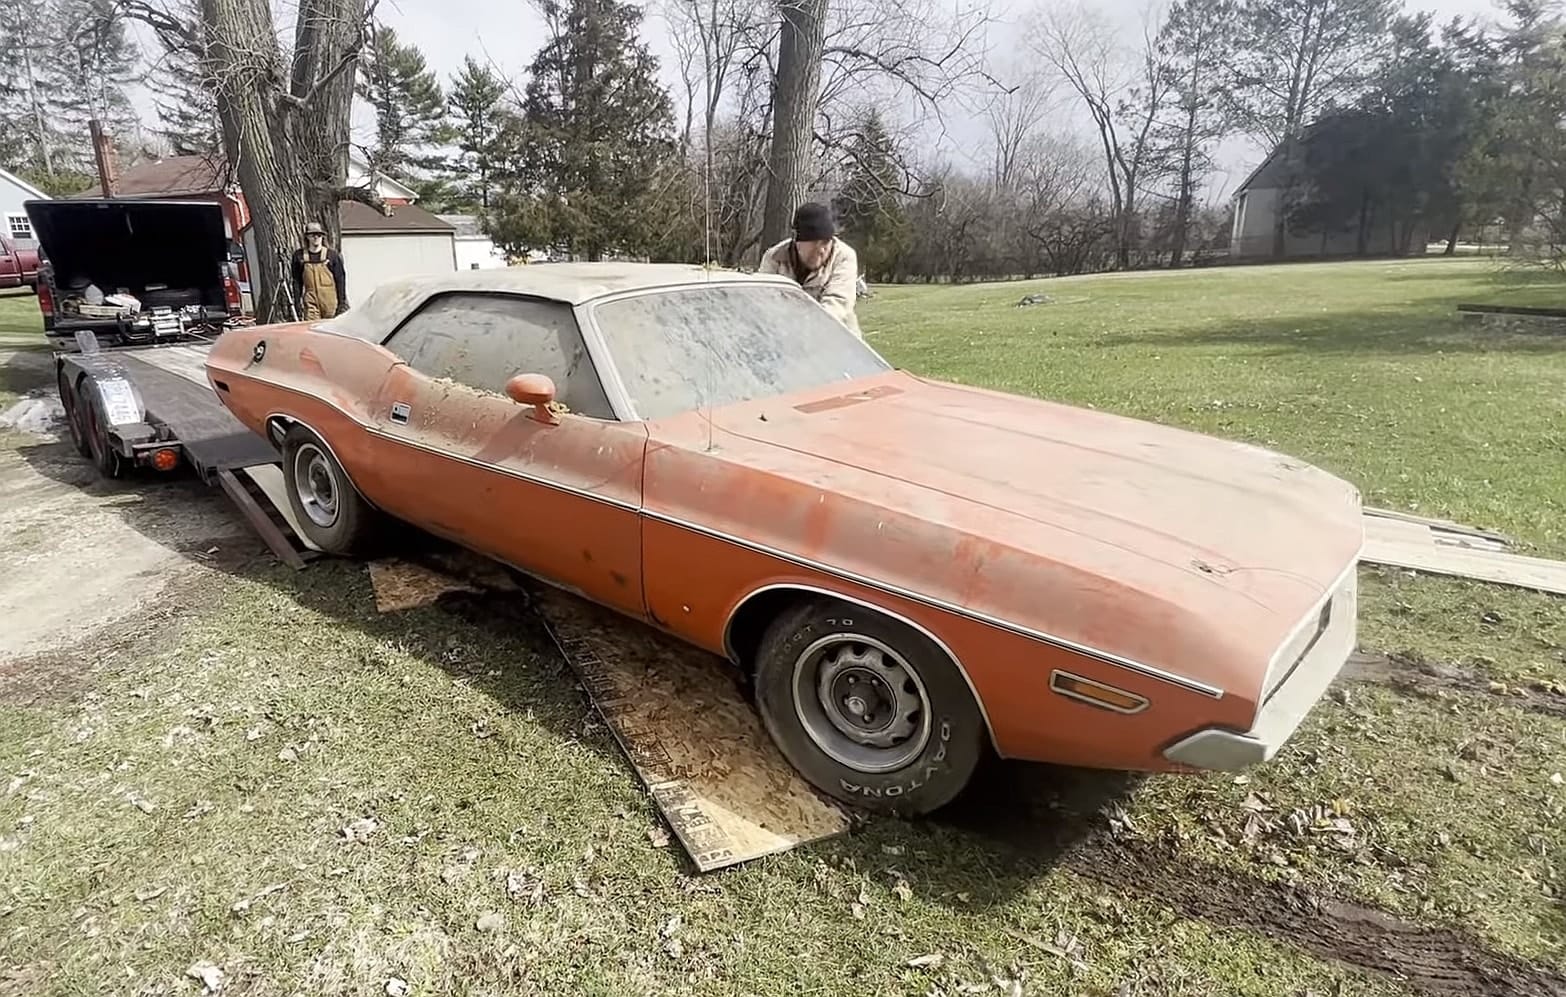 1971 Dodge Challenger Convertible: A 44-Year-Old Barn Find Revival